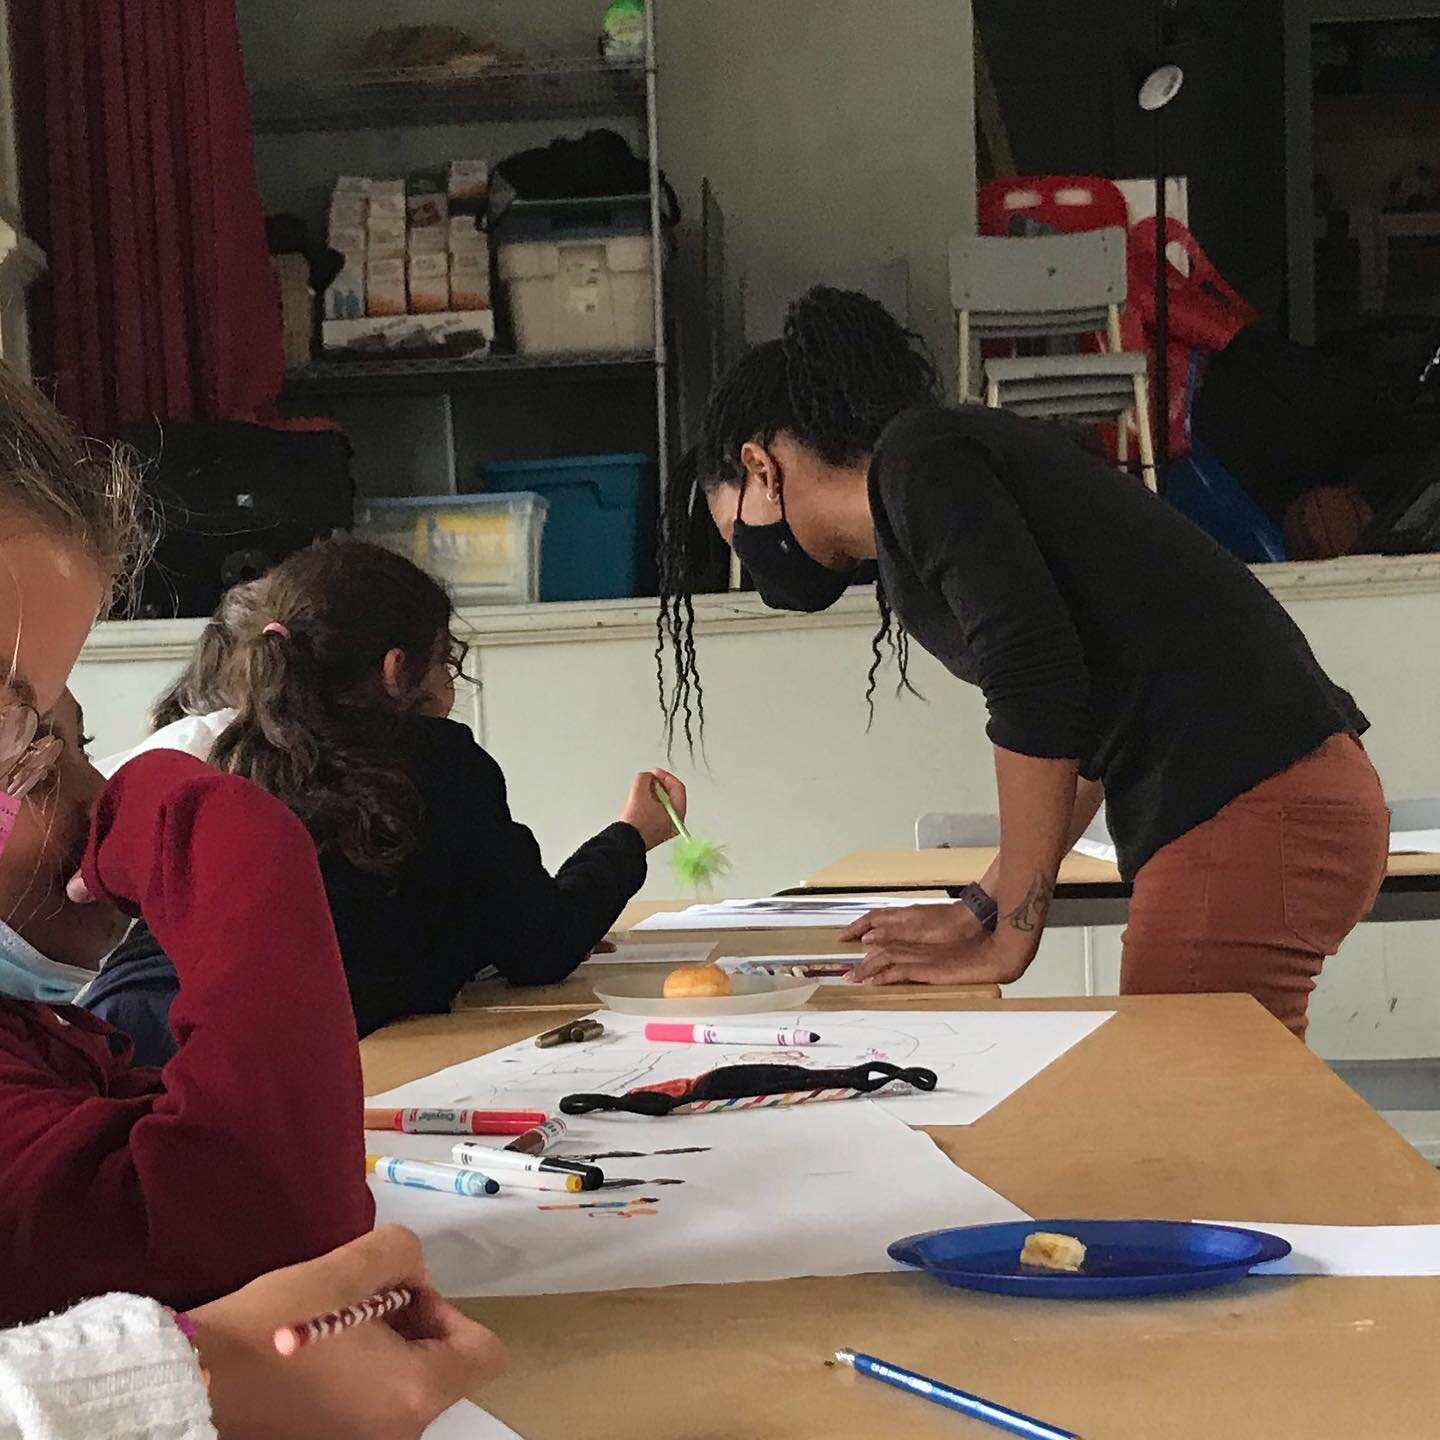 We were so excited to welcome the local professional artist, Letitia Fraser, to our program yesterday. Letitia will be helping our youth paint a new YouthNet mural over the summer, so we spent the afternoon yesterday thinking about the kinds of thing